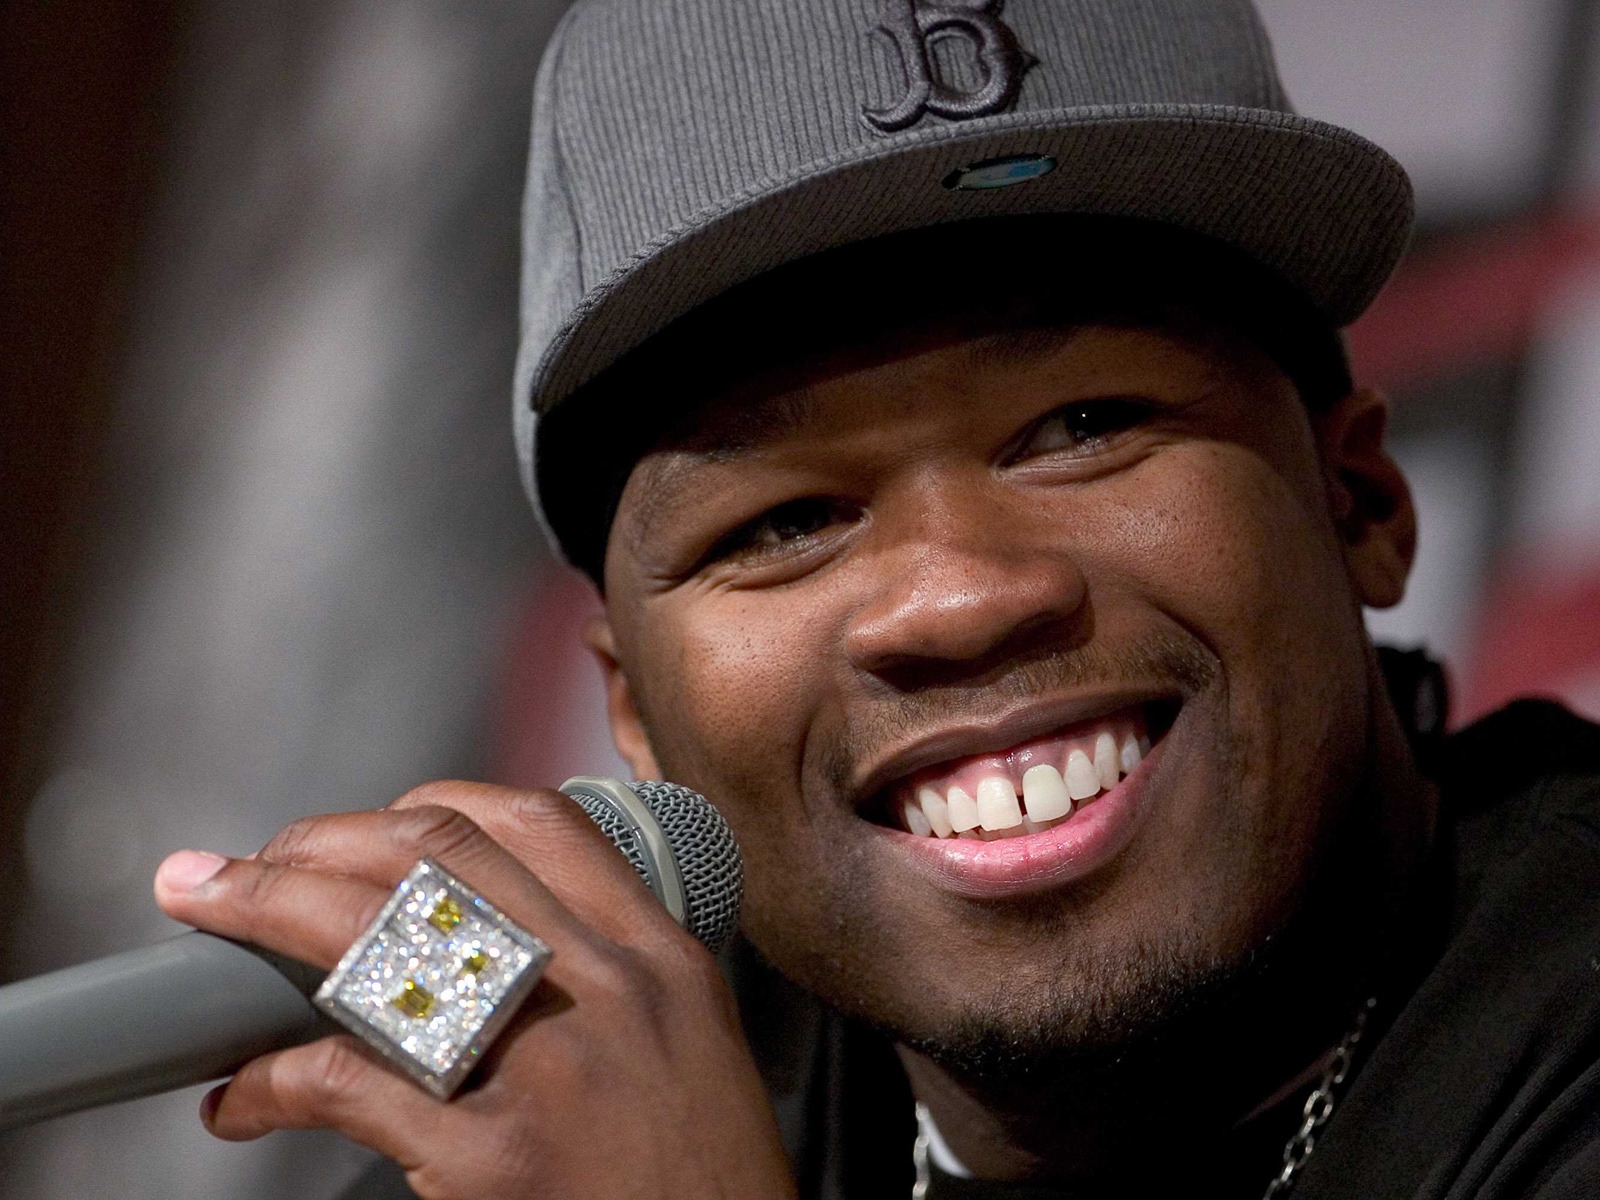 50 Cent Smile for 1600 x 1200 resolution